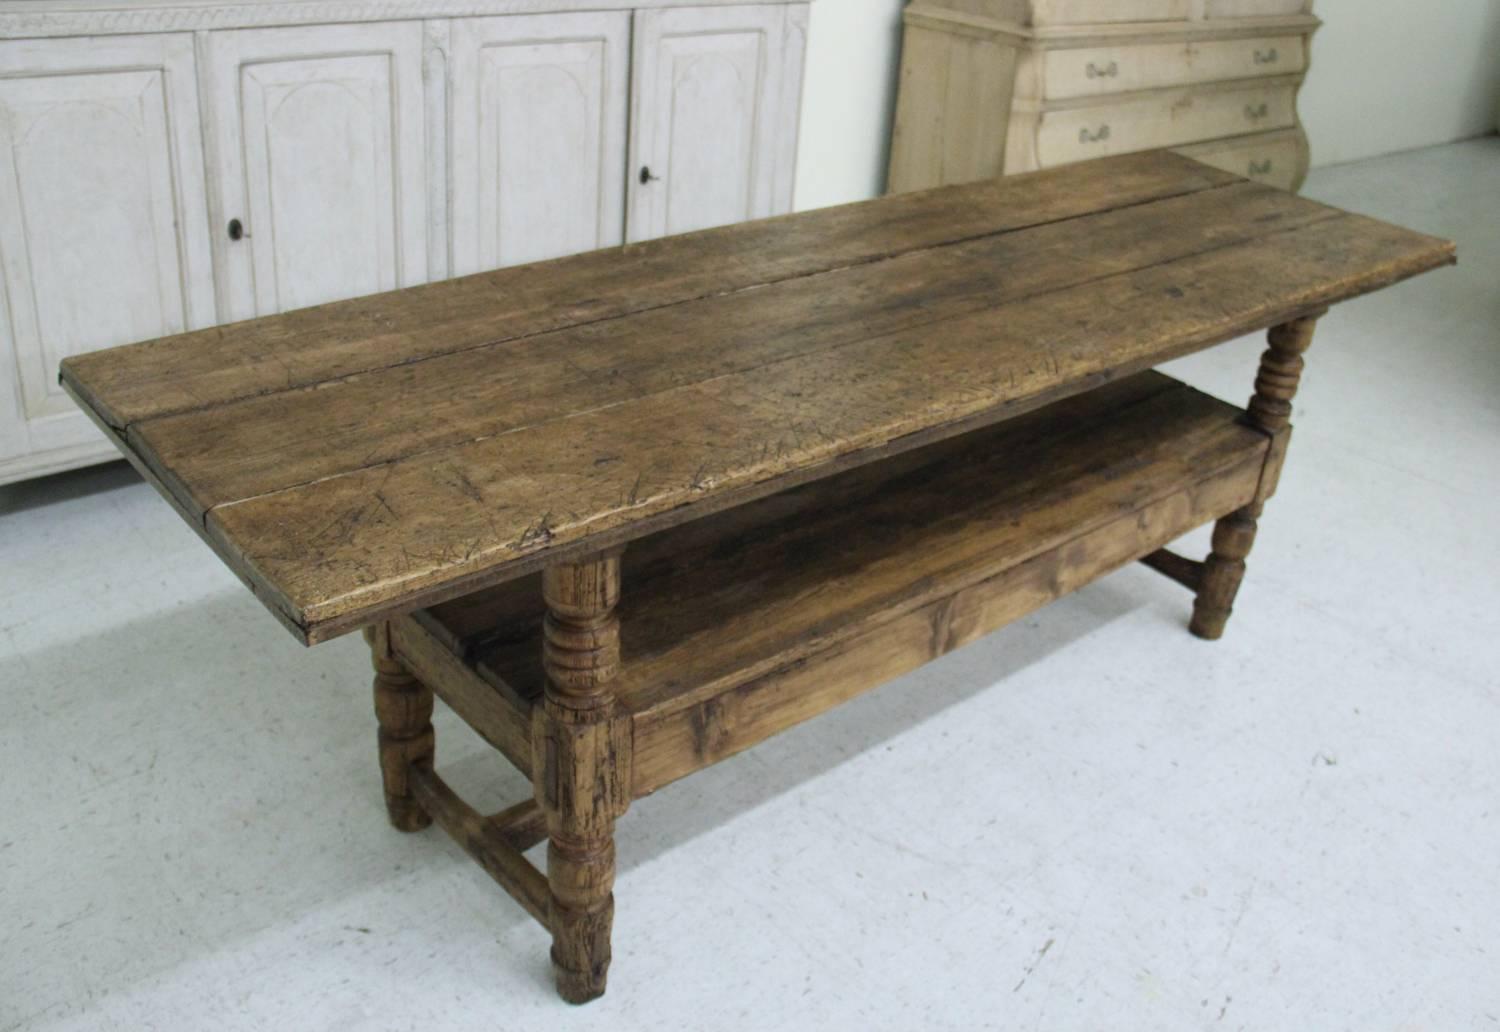 A 19th century Spanish Bishop's bench in the Provincial style that has been converted to a console table. The table has a plank top and turned legs with center stretcher below the lower shelf.